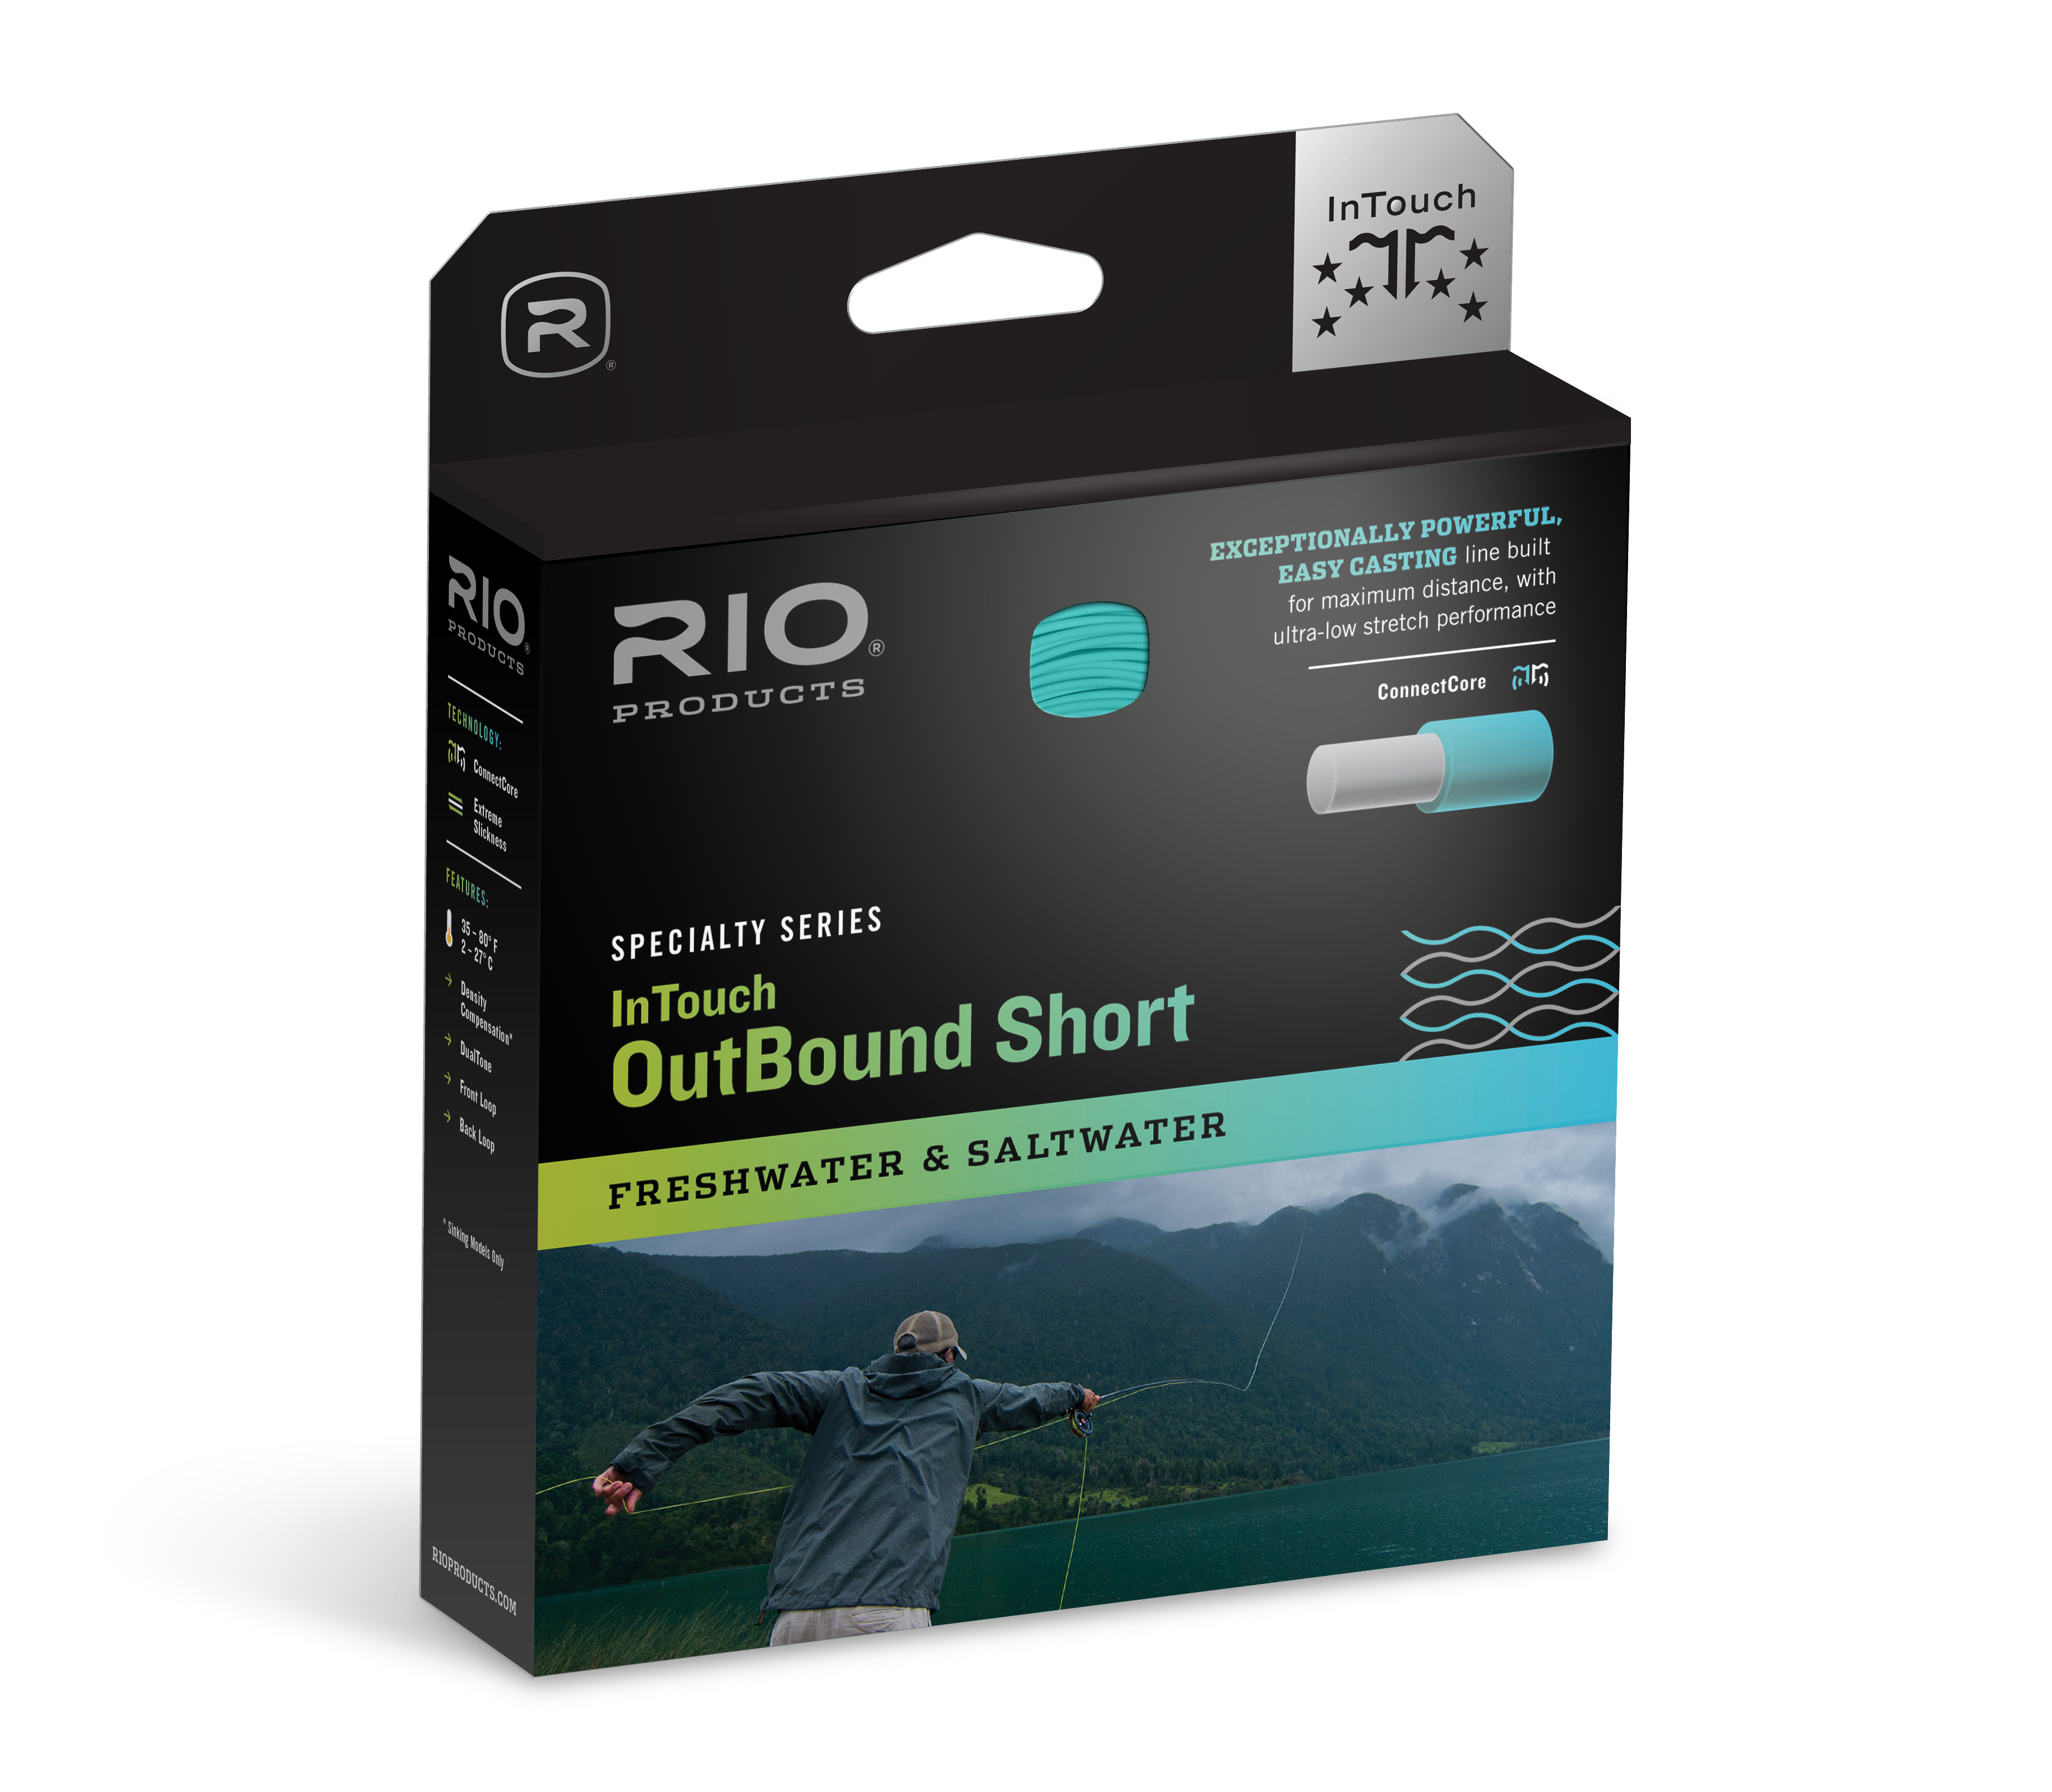 Rio Outbound Short InTouch Float/Int